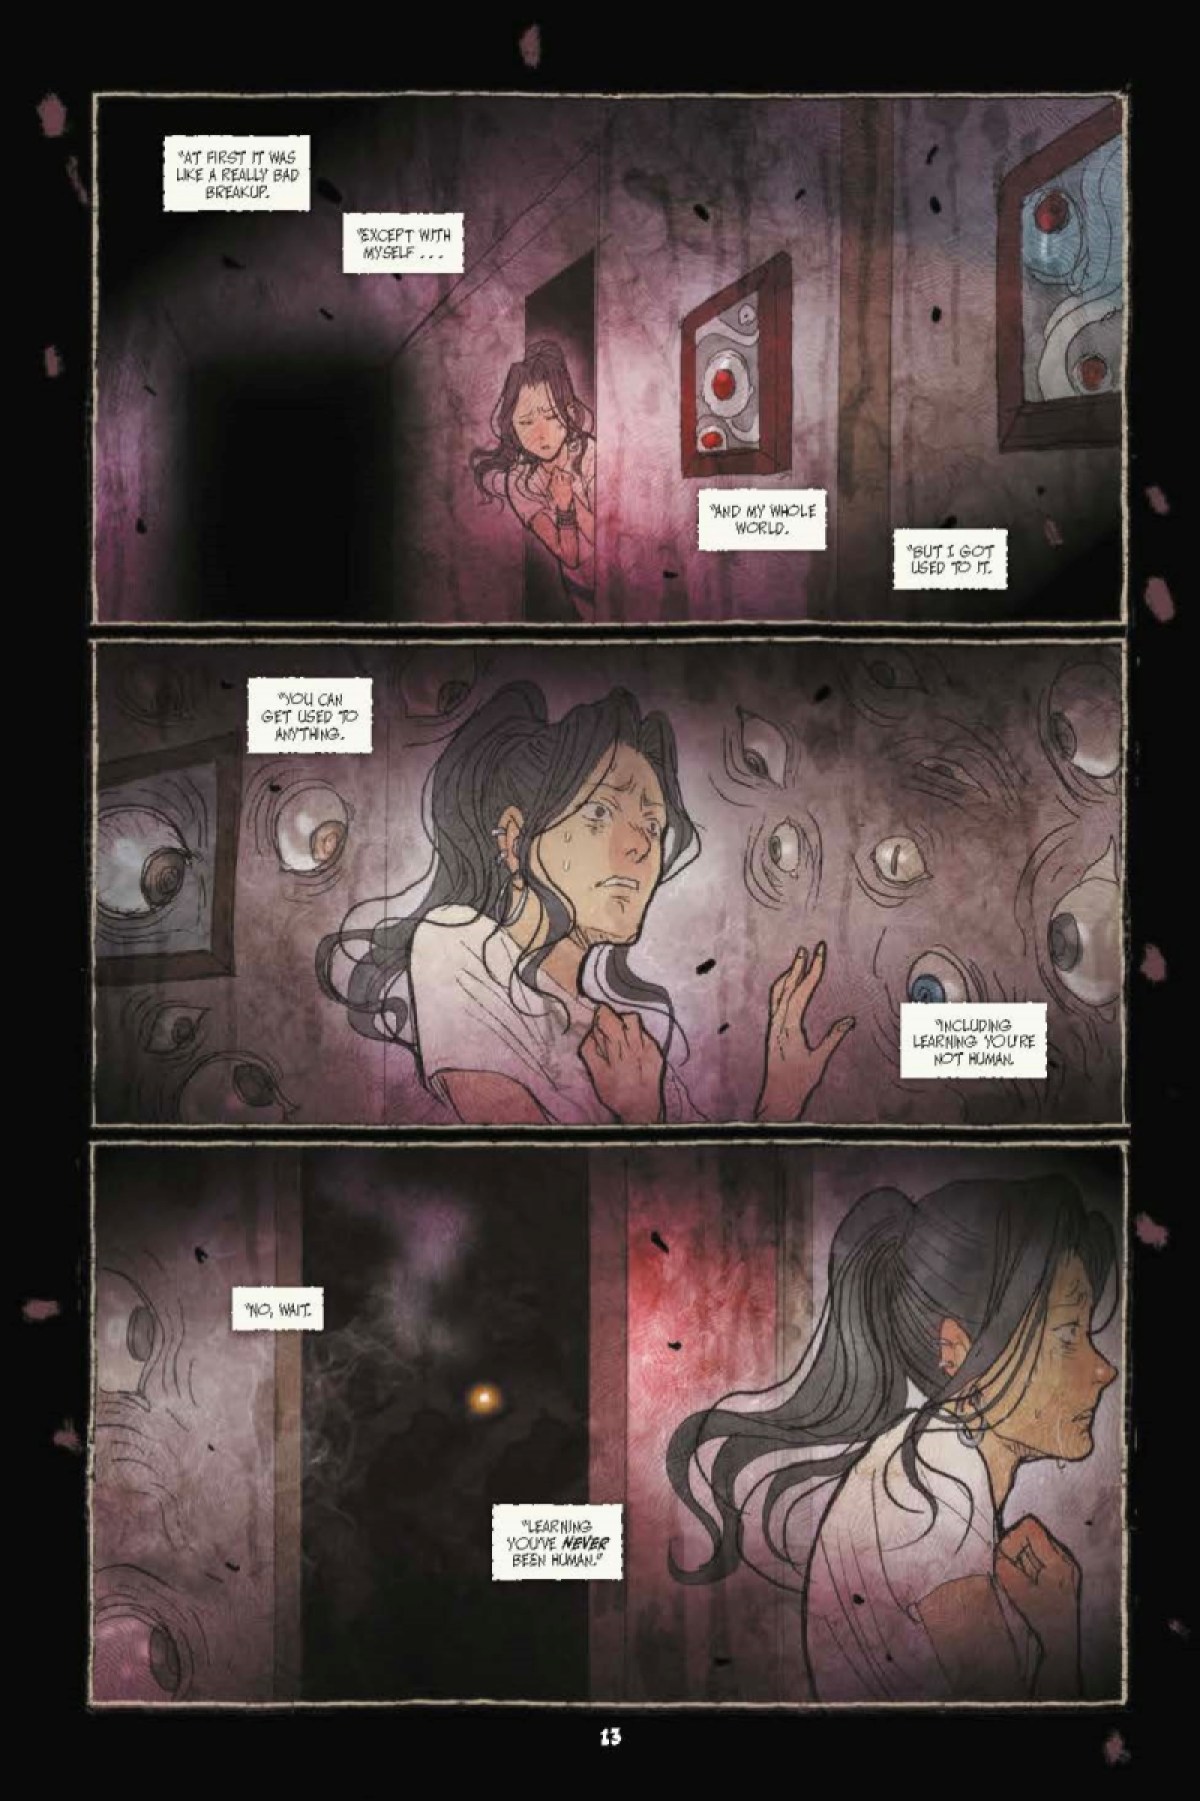 The Night Eaters Book 2: Her Little Reapers interior art 2